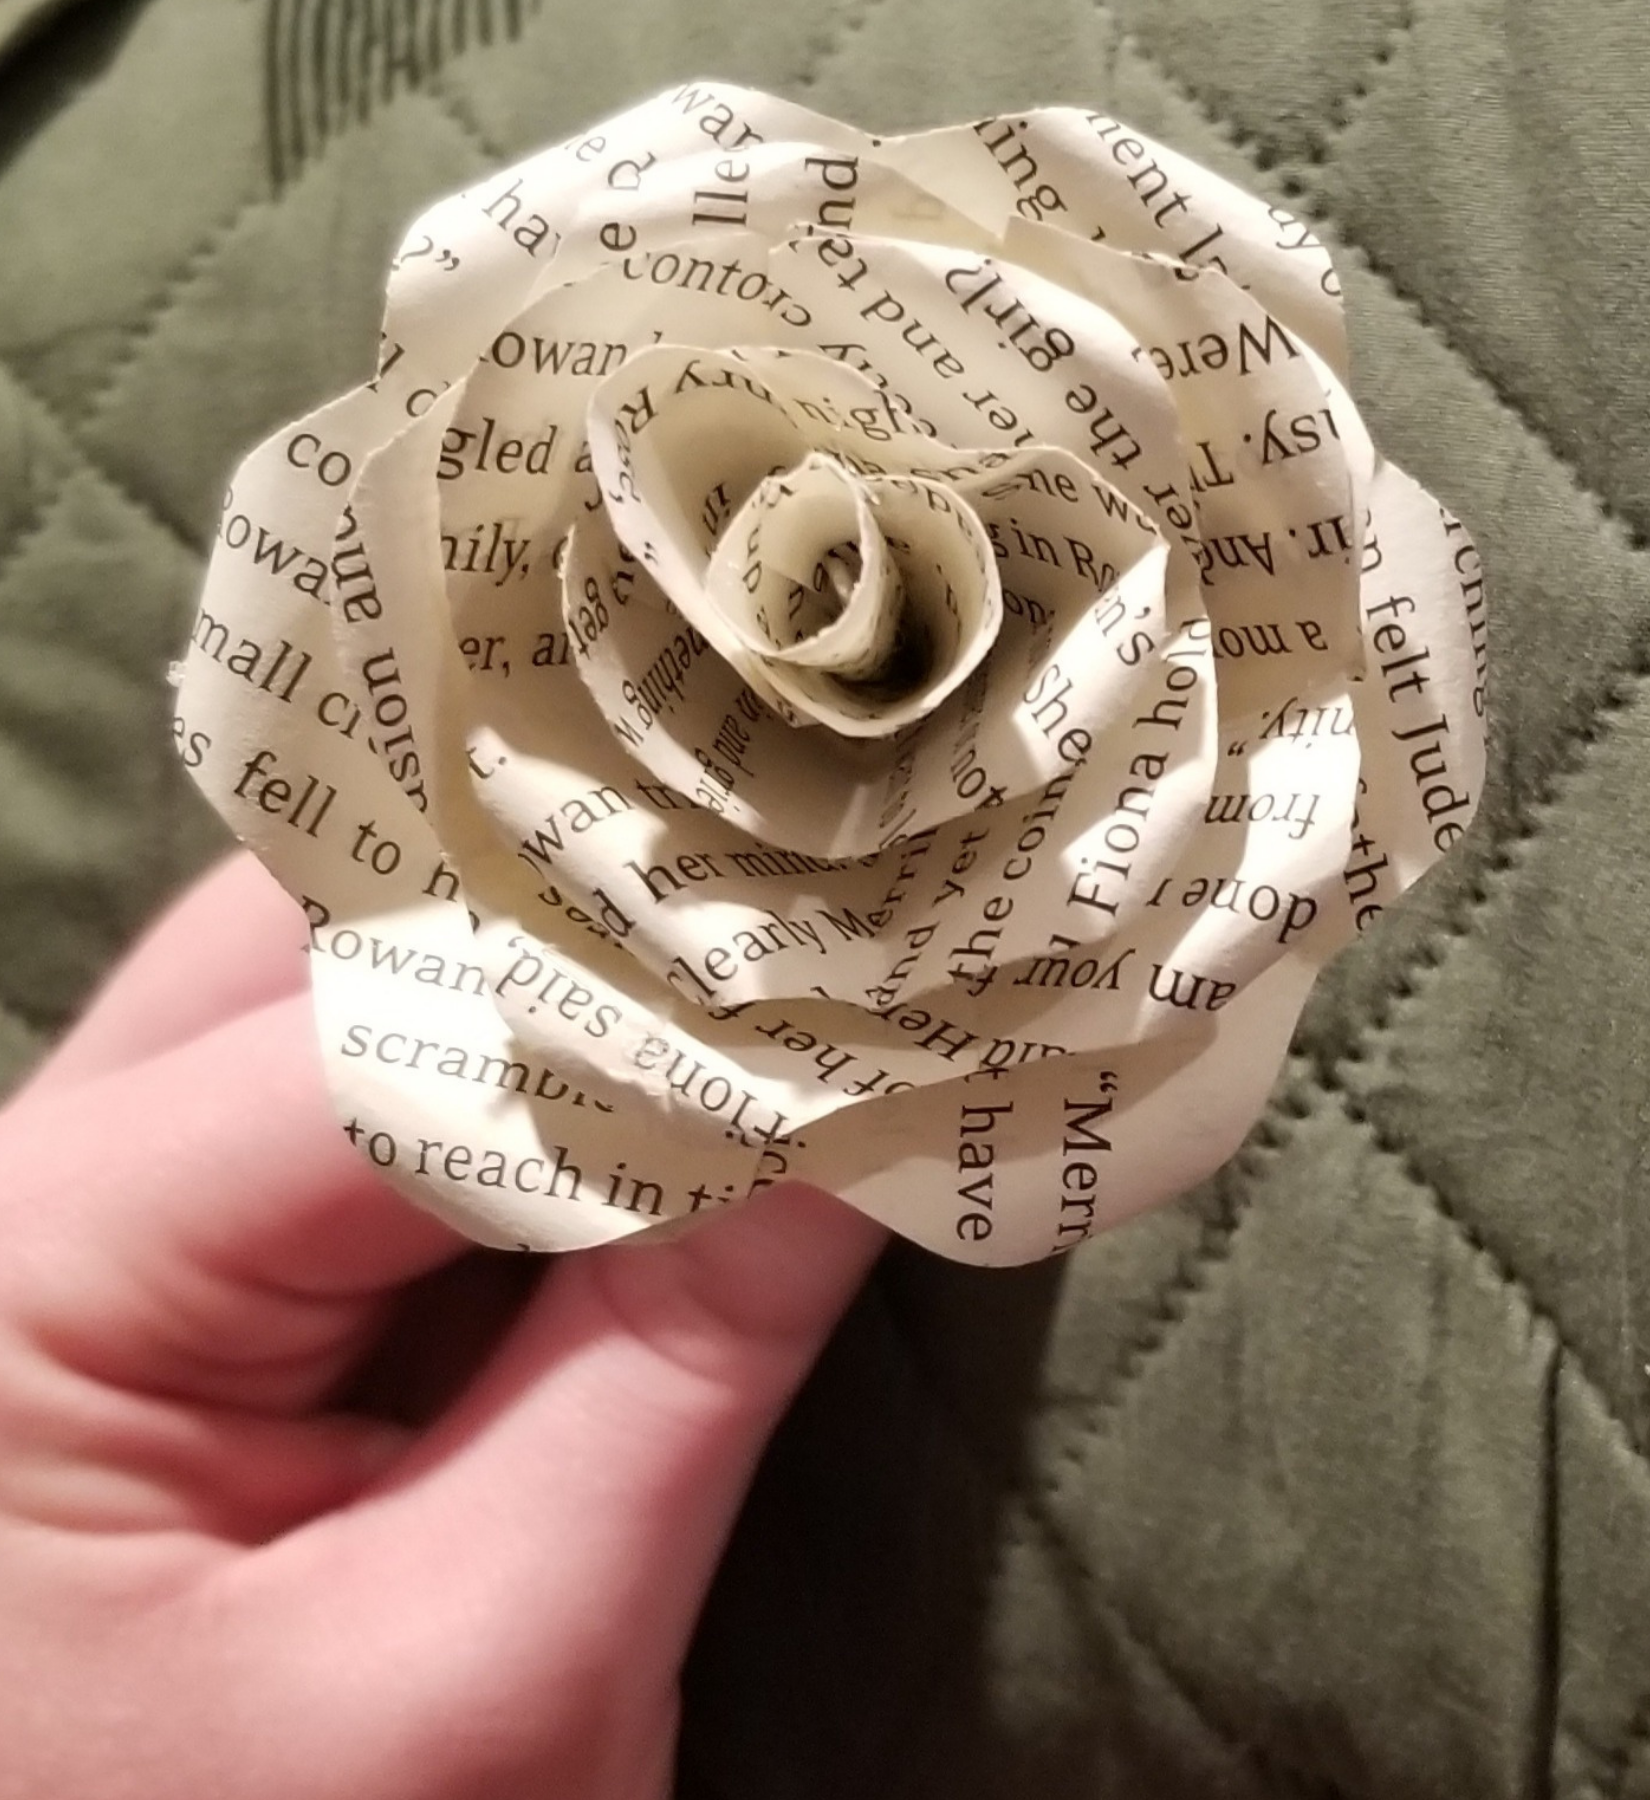 a rose made out of book pages held by a light skinned hand against a green background